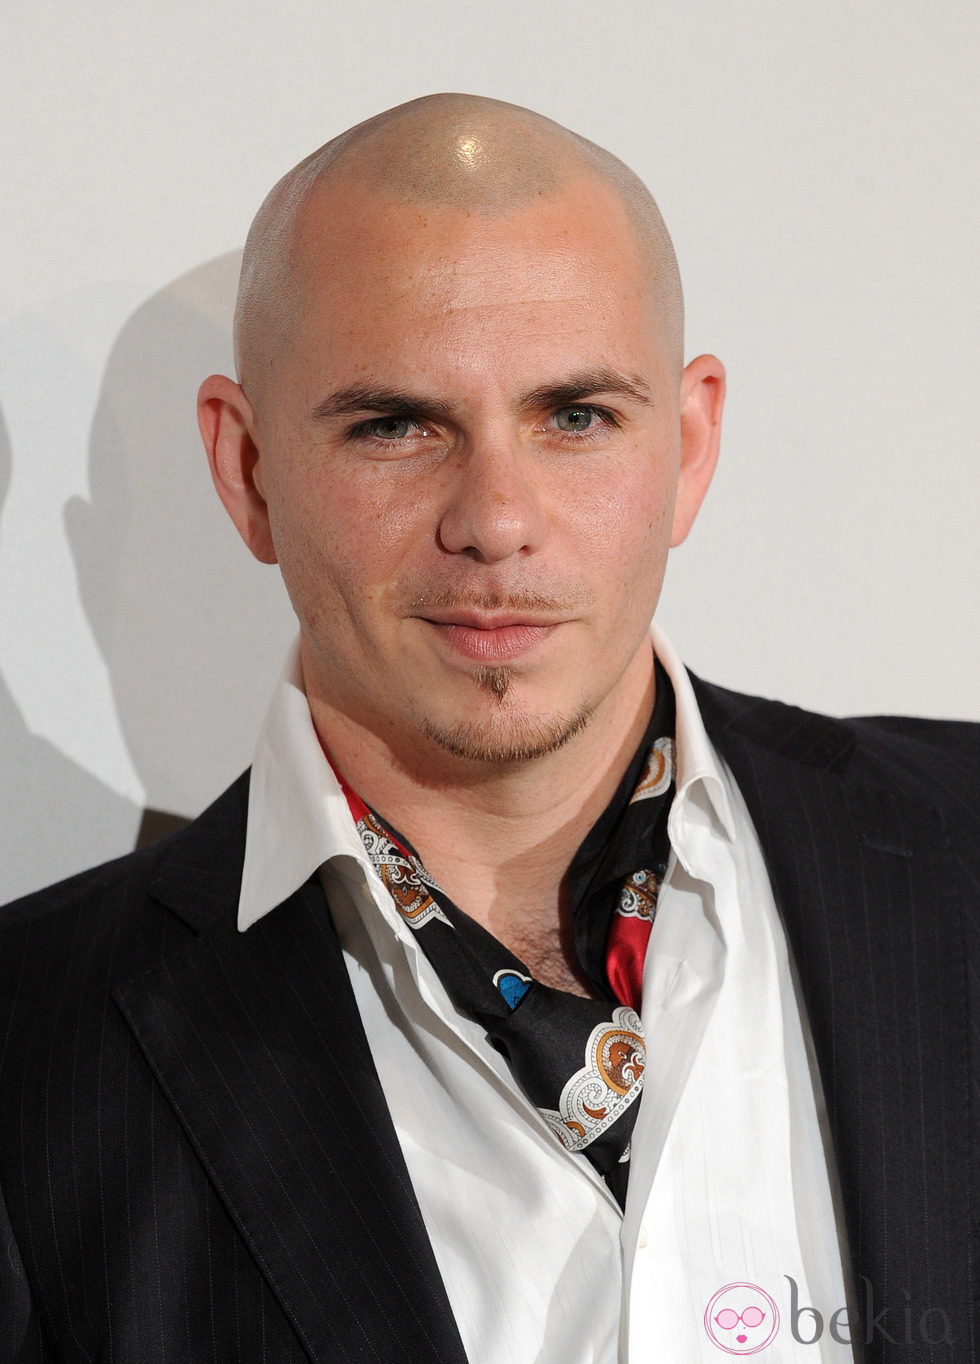 Pitbull Smp Hair Bald Density Brothers Cubano Scalp Hairline Considering Al...